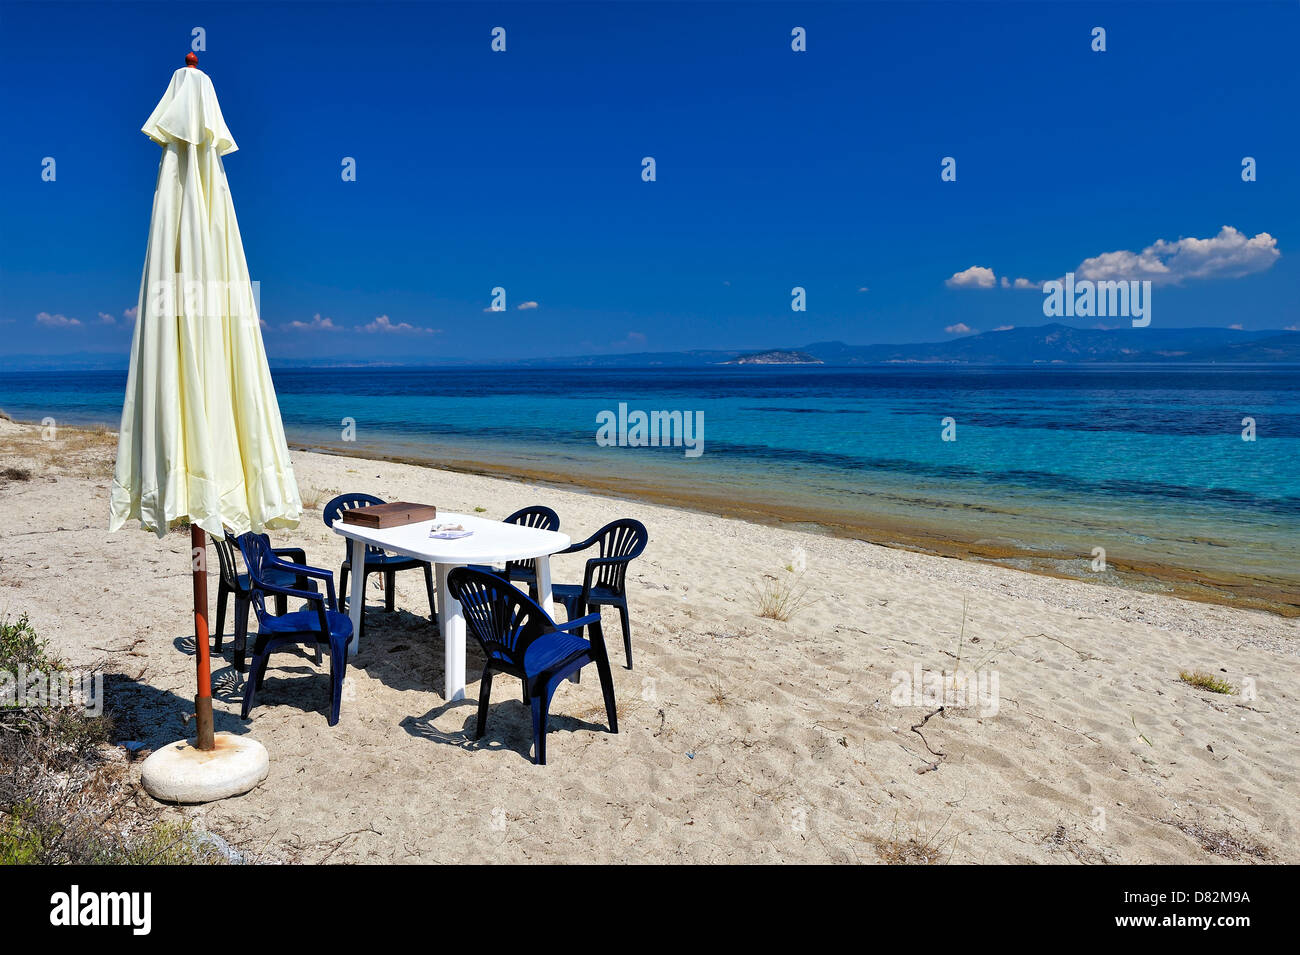 Umbrell,table and six stools on the bezch Stock Photo